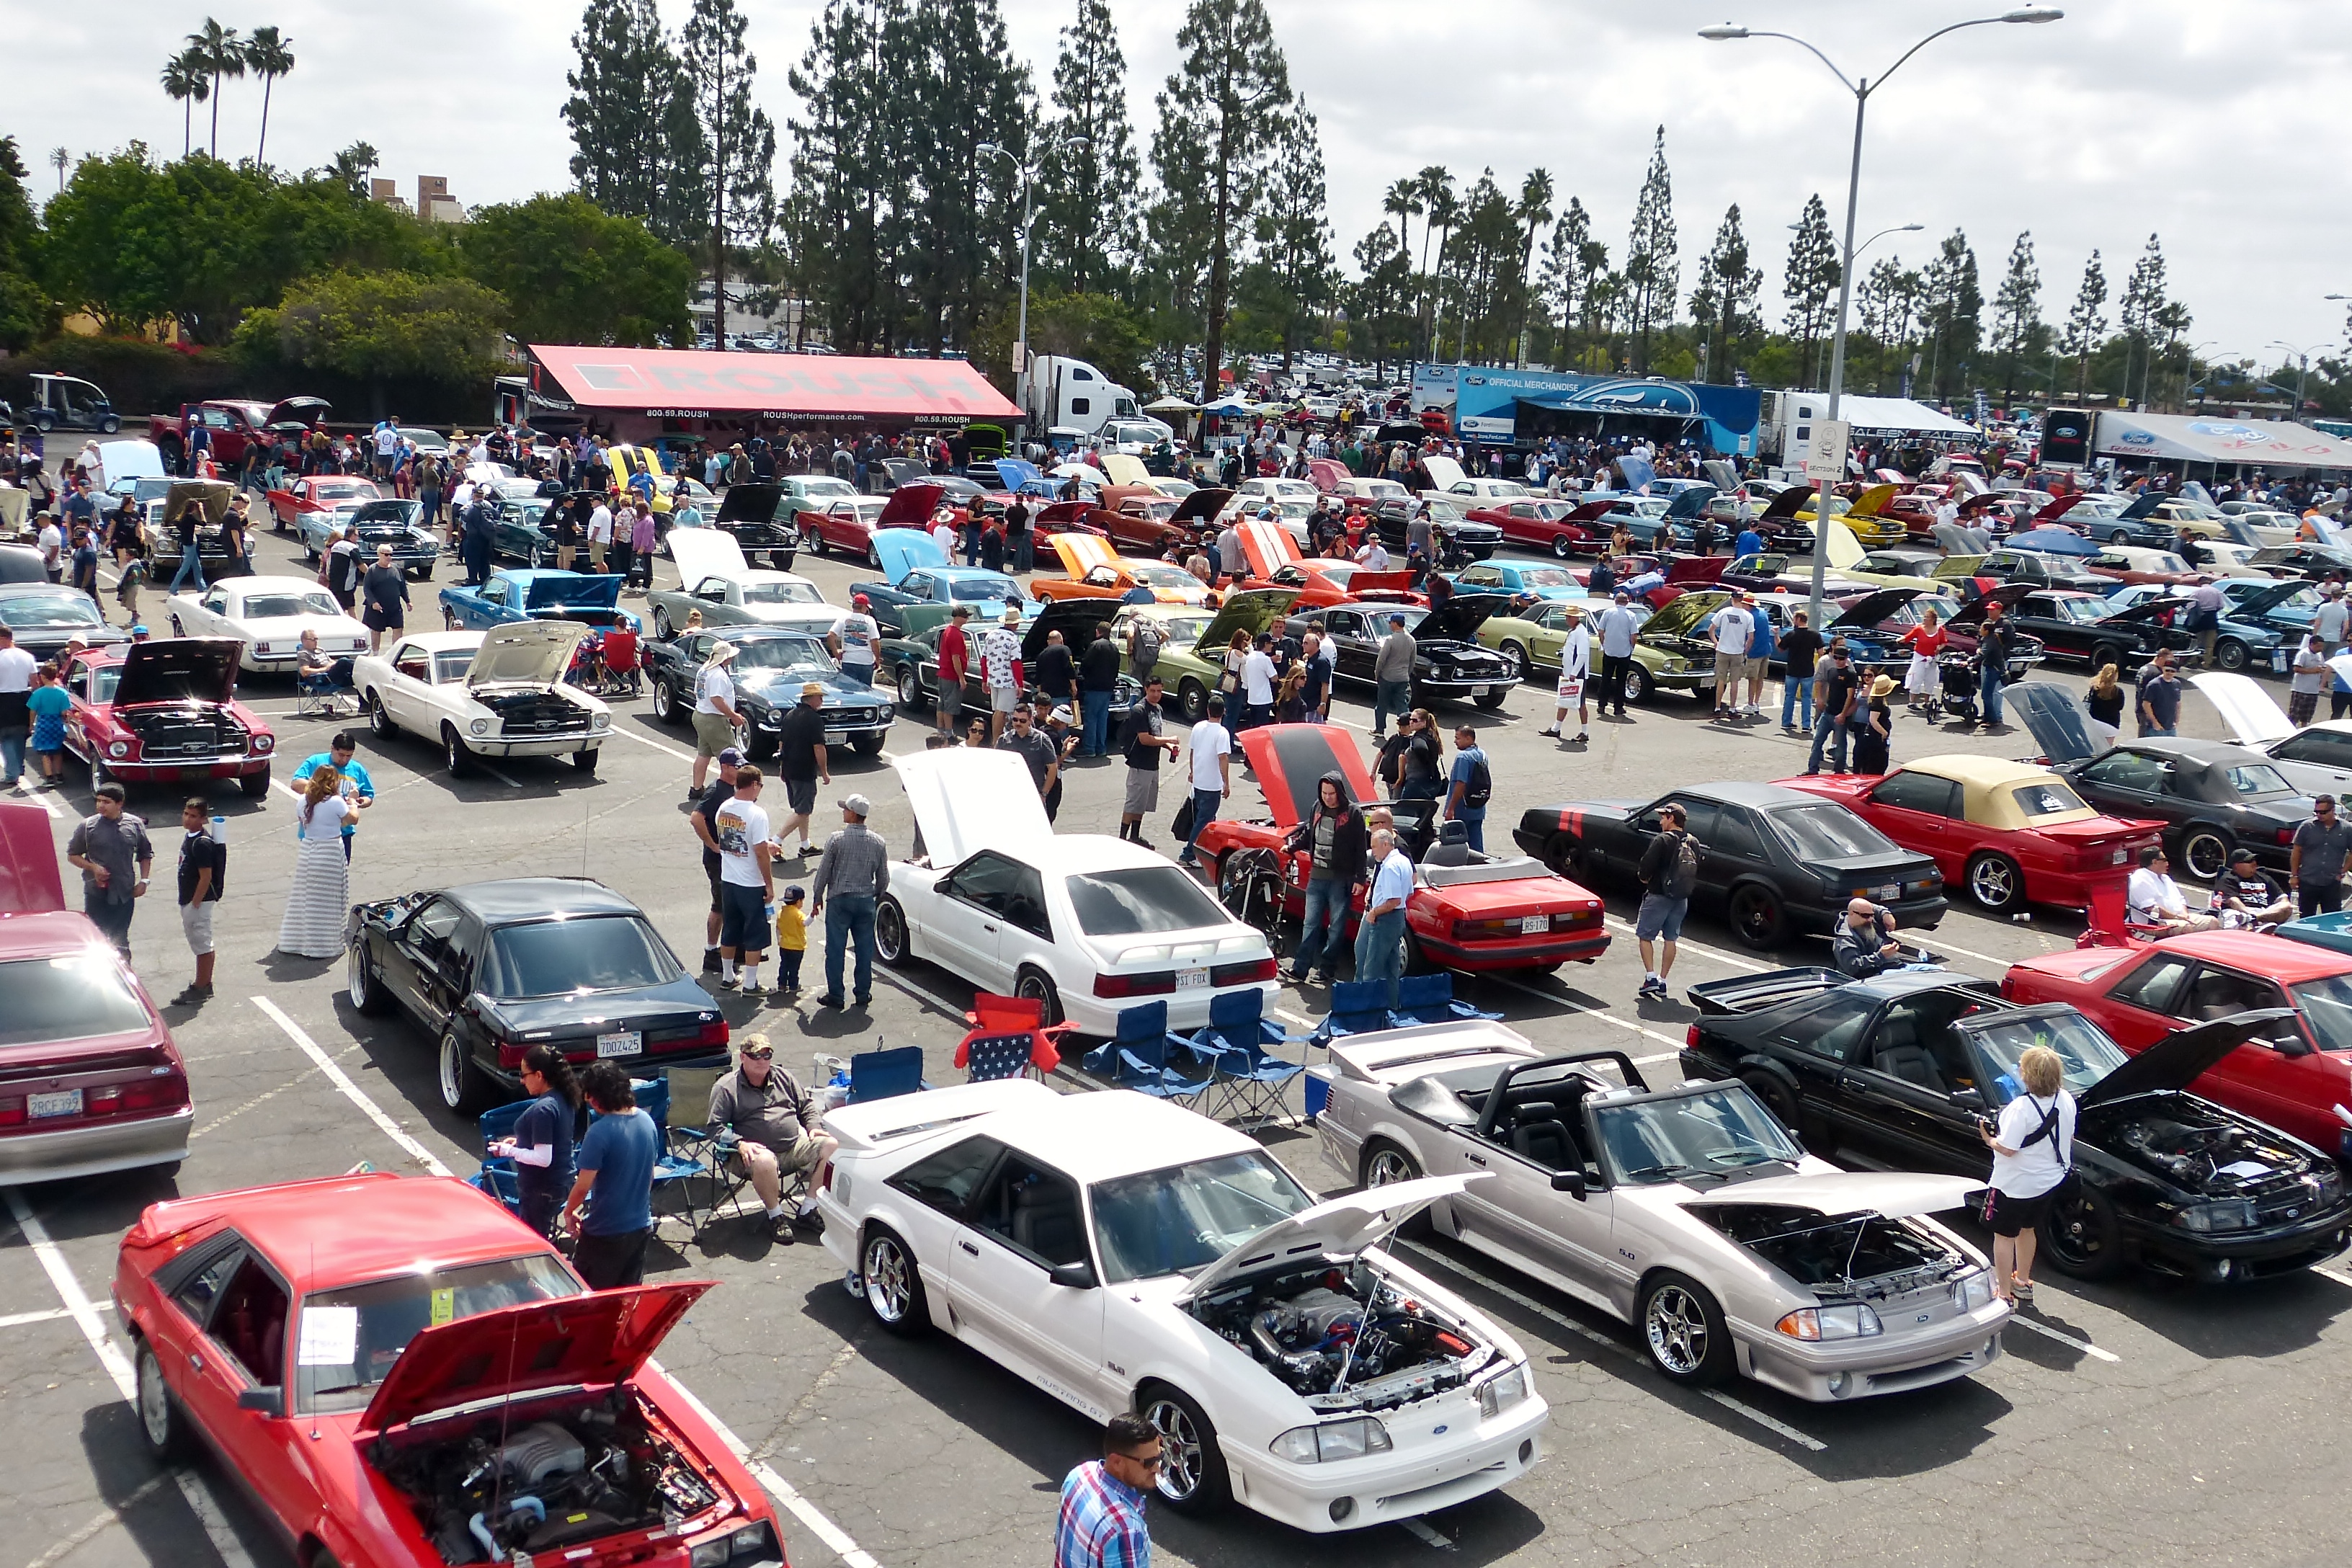 Fabulous Fords Forever 2014 — Has it been nearly 30 years since the birth of “Fab Fords?”